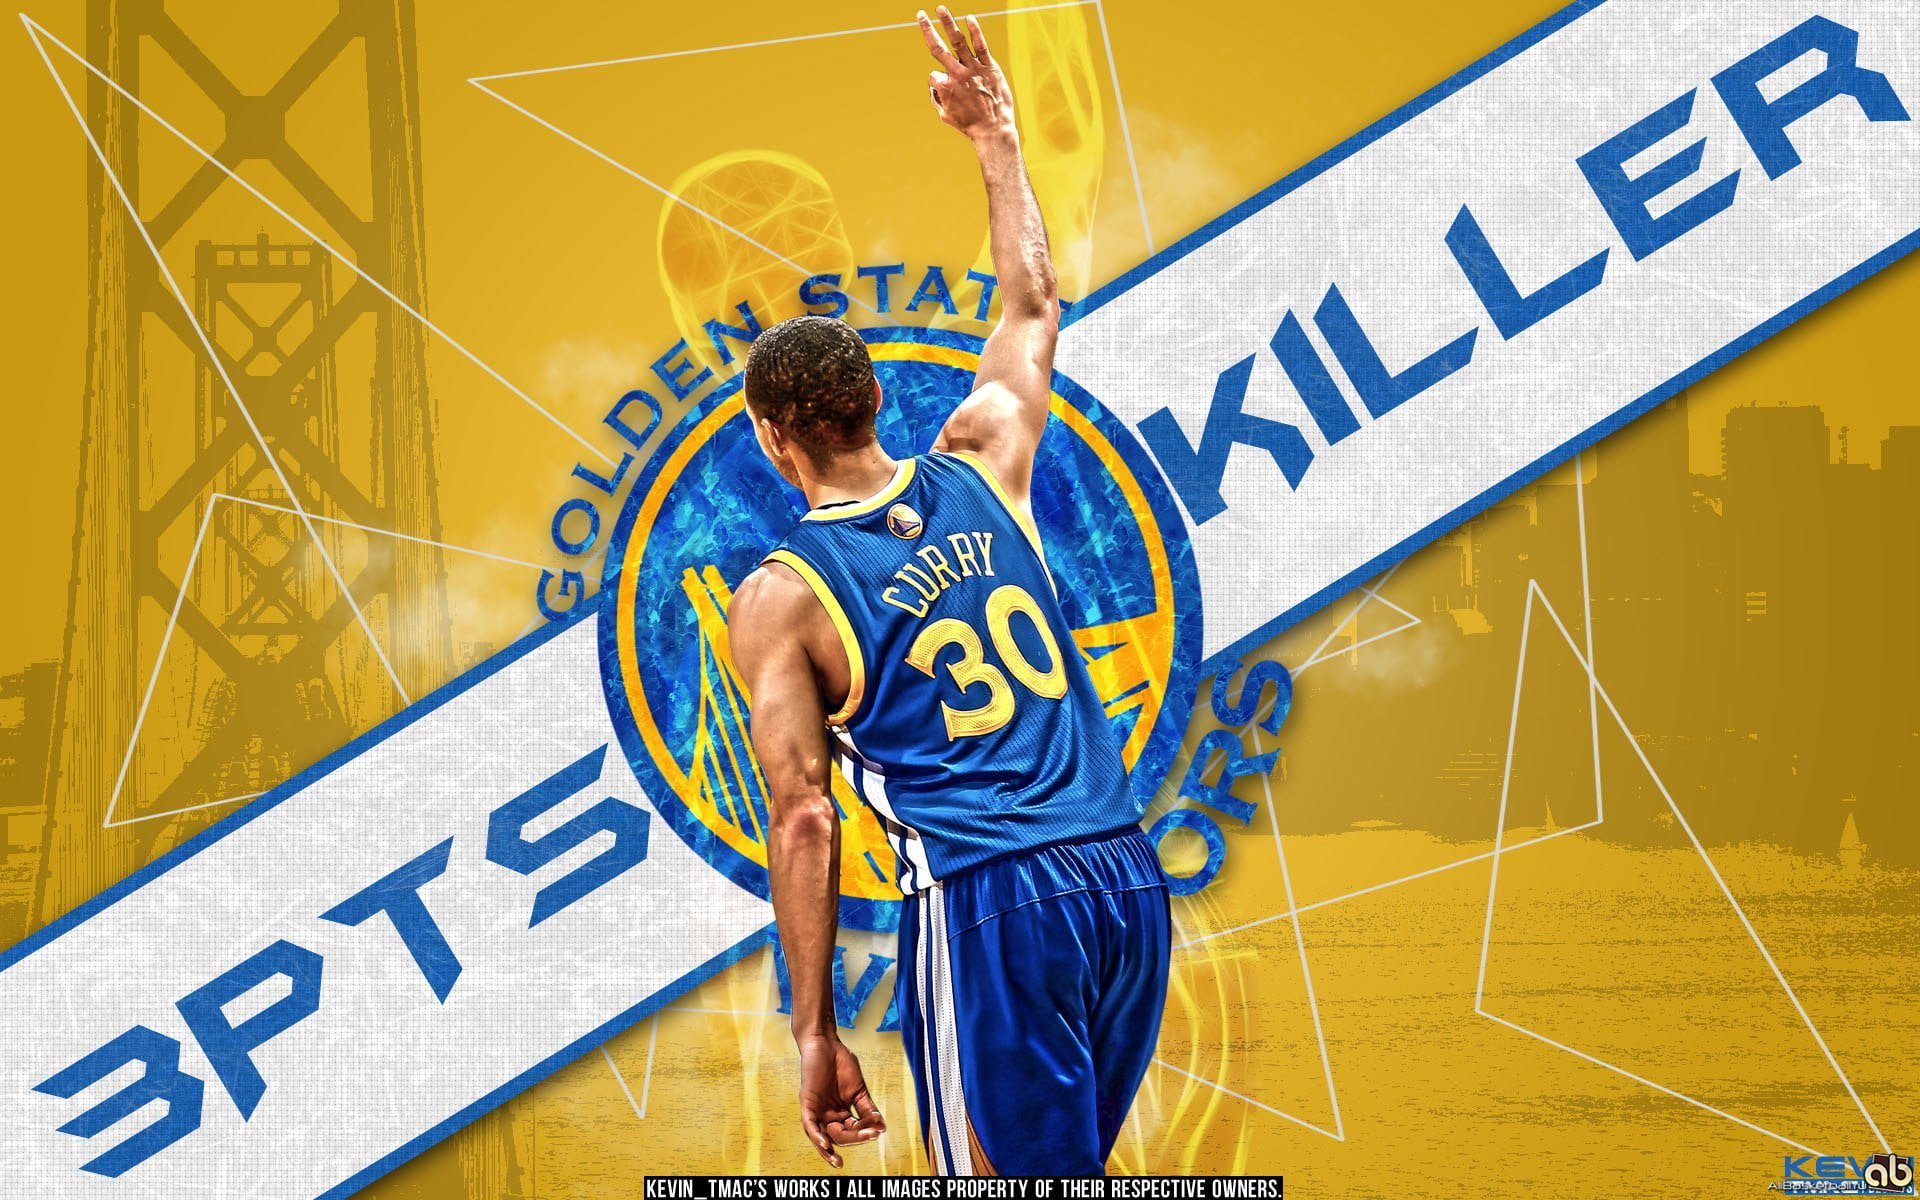 blue and yellow Stephen Curry 30 jersey, basketball, NBA, killer